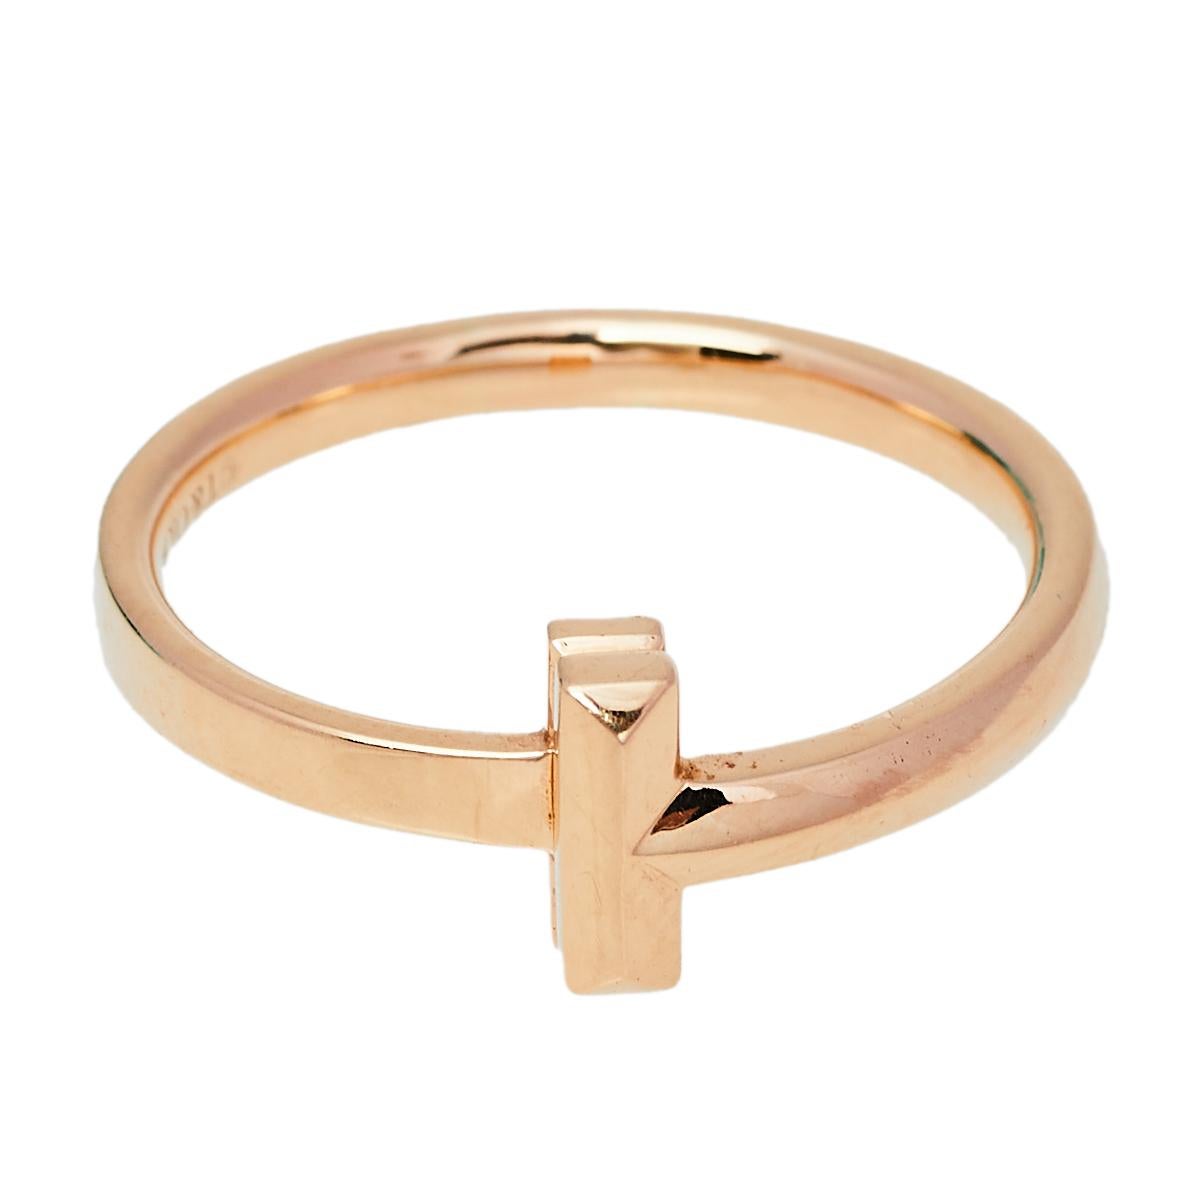 The Tiffany T collection is one of the most popular jewelry lines from Tiffany & Co. Each piece comes with a distinct shape that displays or re-interprets the 'T' symbol. This Tiffany T T1 ring is crafted from 18K rose gold and styled as a wire-like